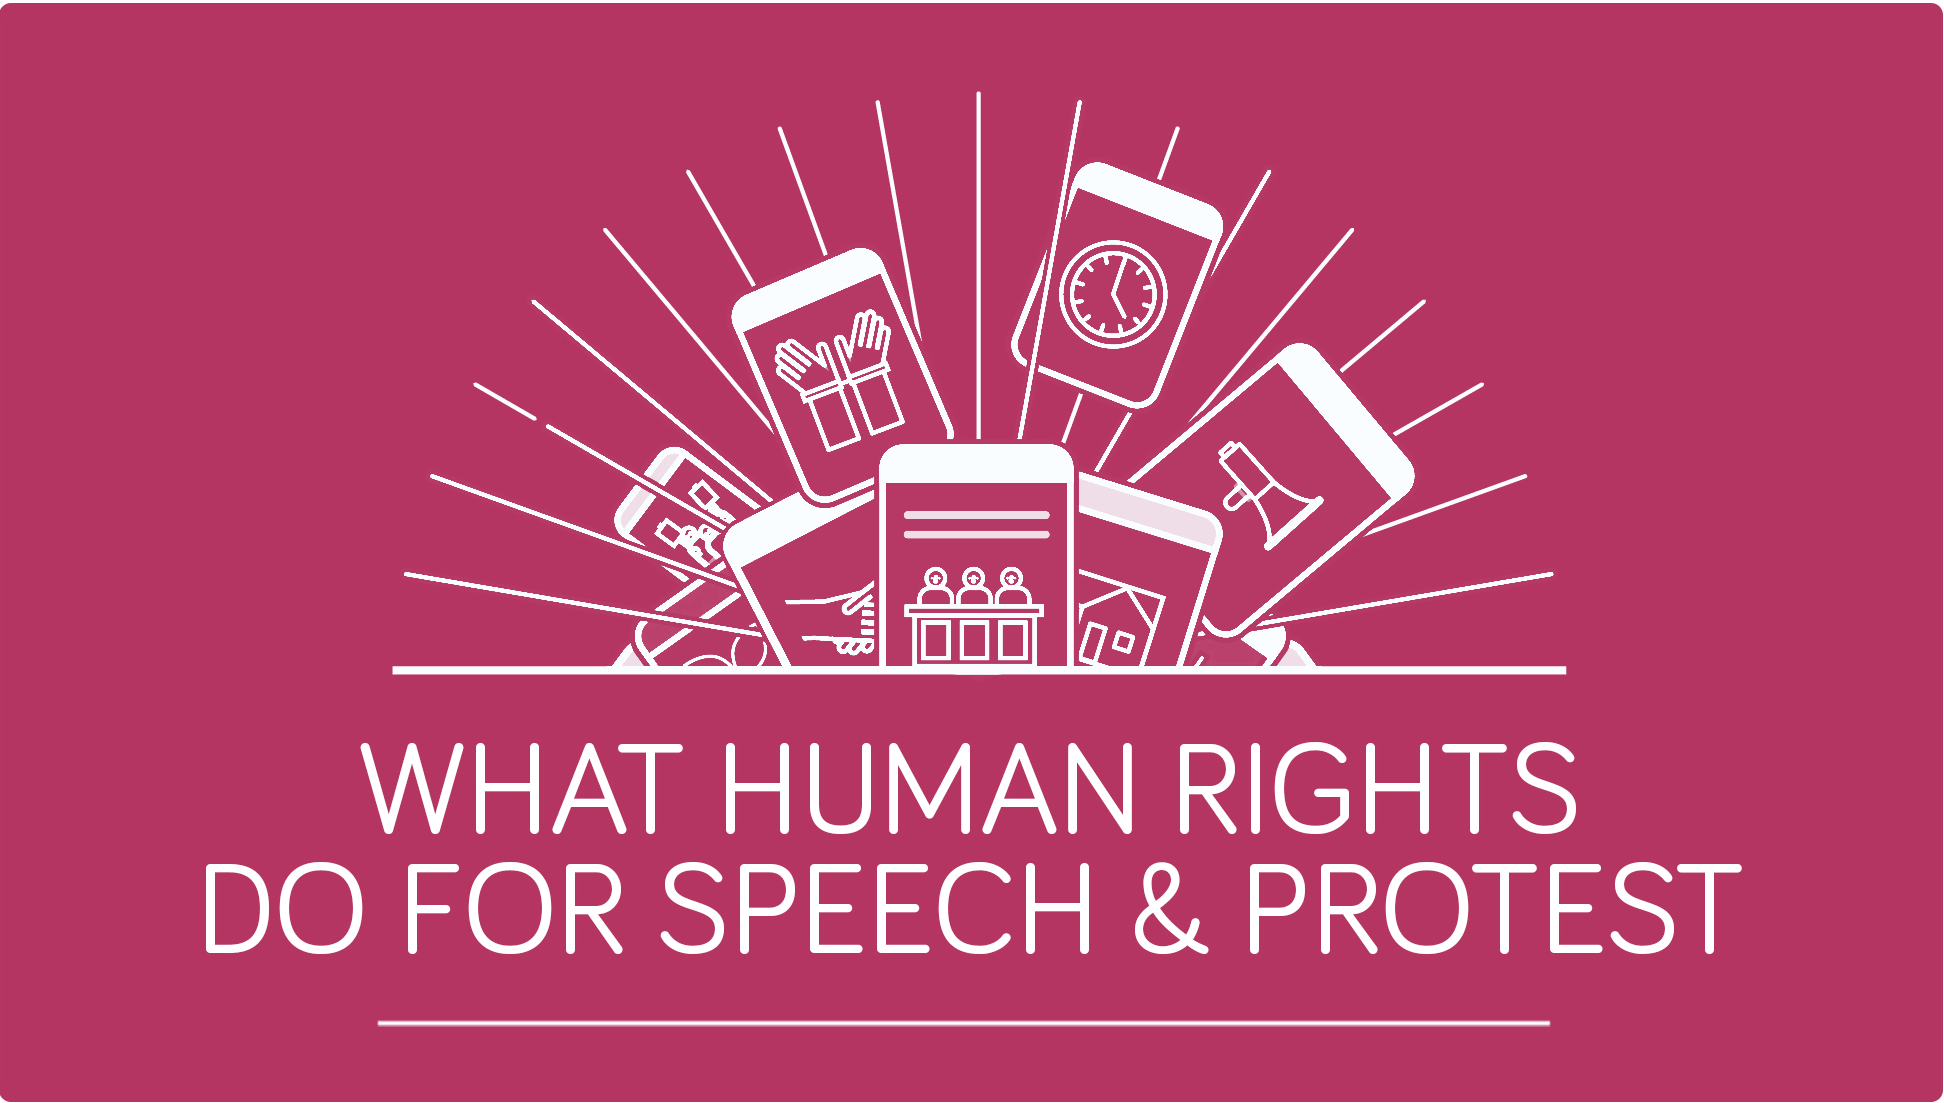 What Human Rights do for Speech & Protest - RightsInfo1944 x 1103